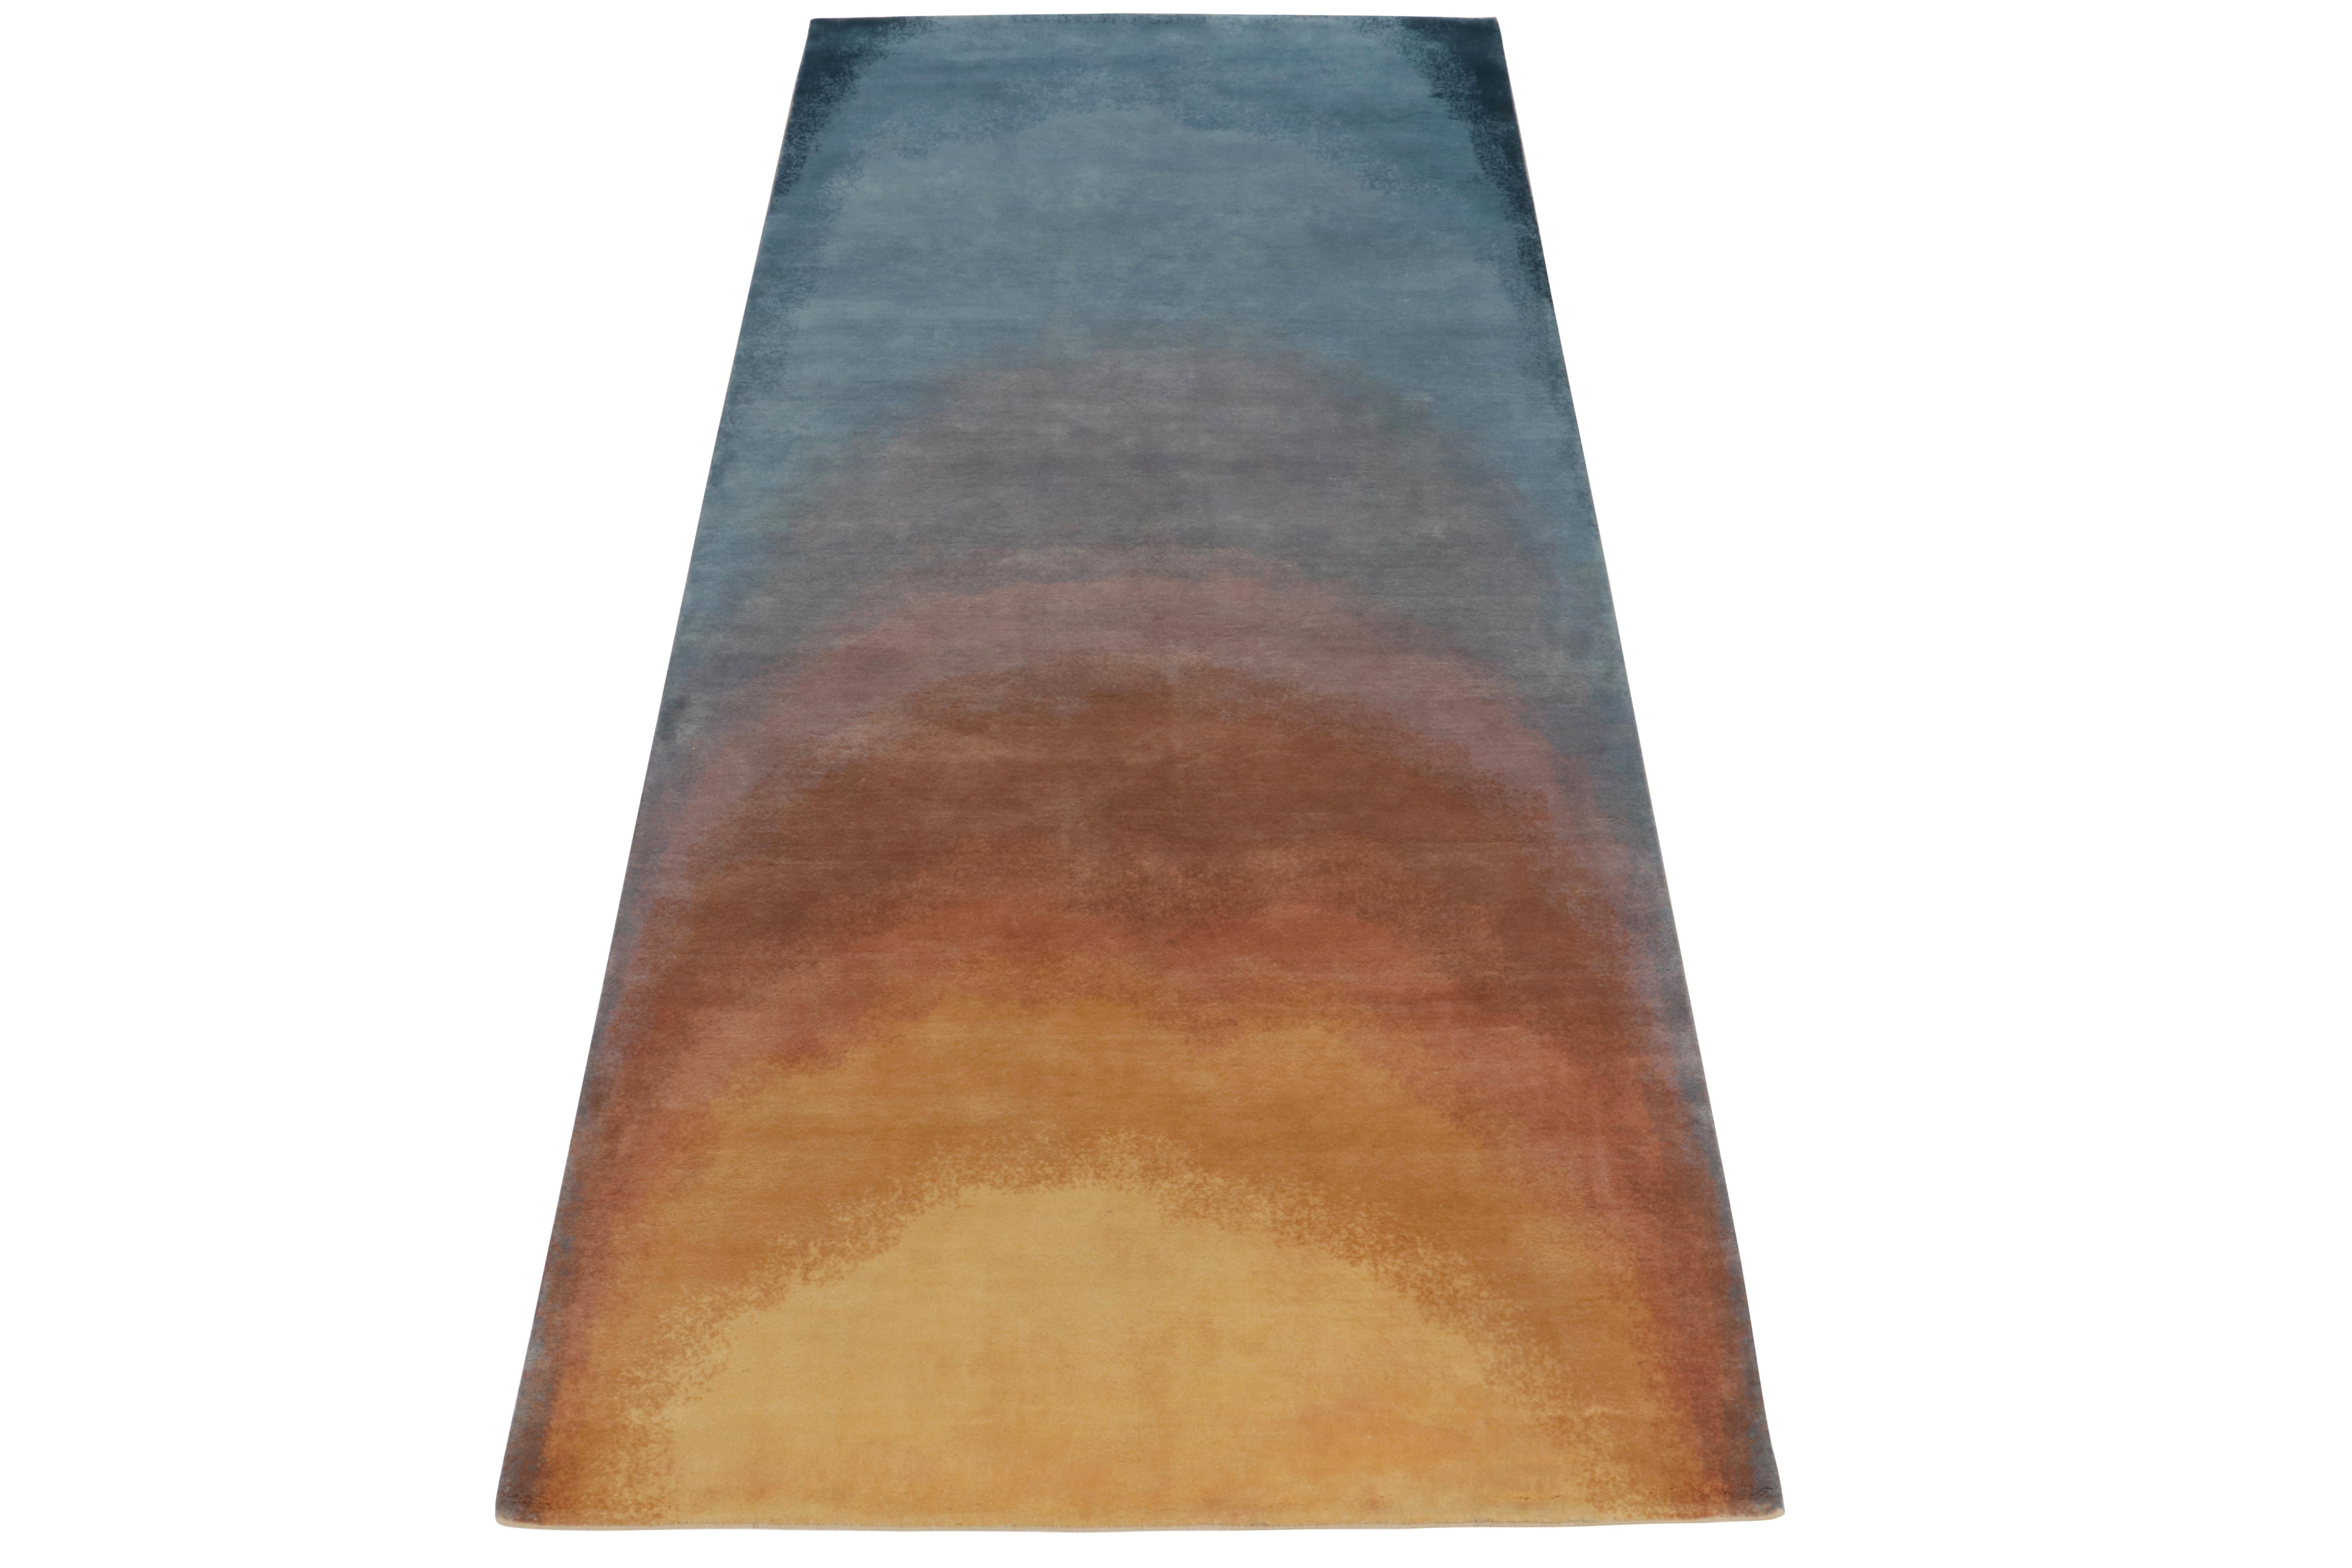 Rug & Kilim presents “Sunrise”—a contemporary take on the most imaginative abstract rug styles of inspiration. The 4x10 hand-knotted piece enjoys a color gradience taking after the colors prevailing in the sky during sunrise. Meticulously done, this